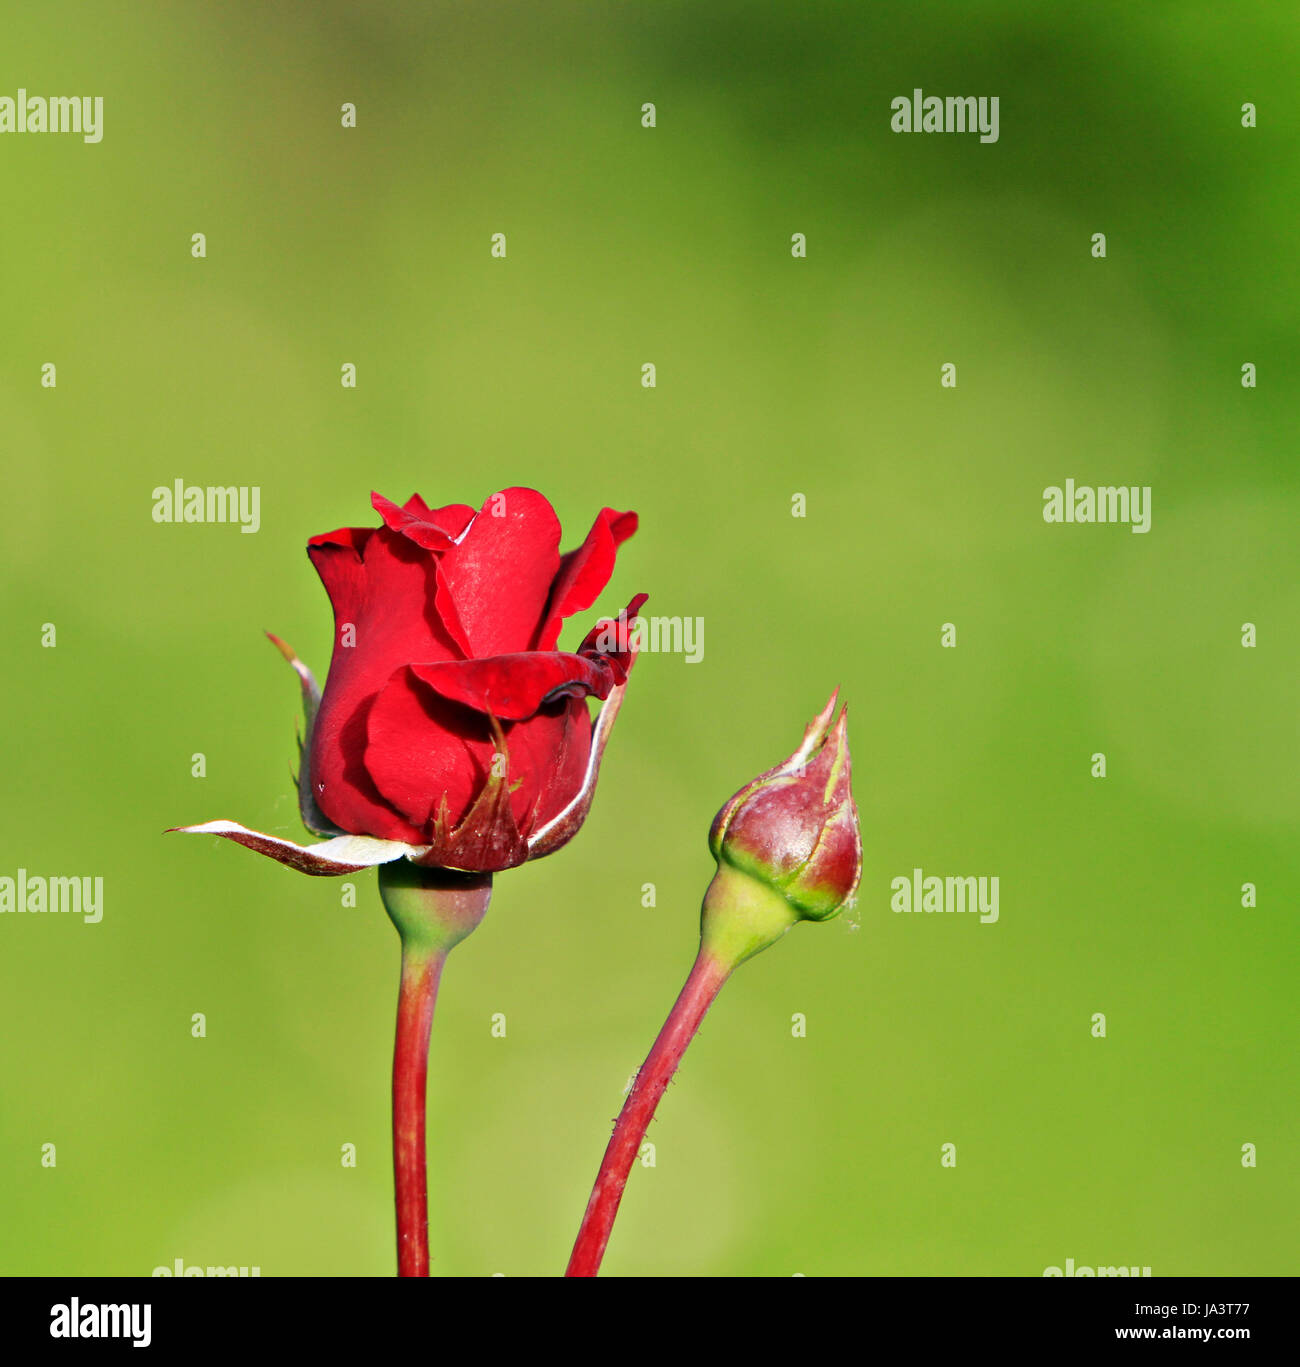 flower, rose, plant, bud, gift, day, during the day, love, in love, fell in Stock Photo